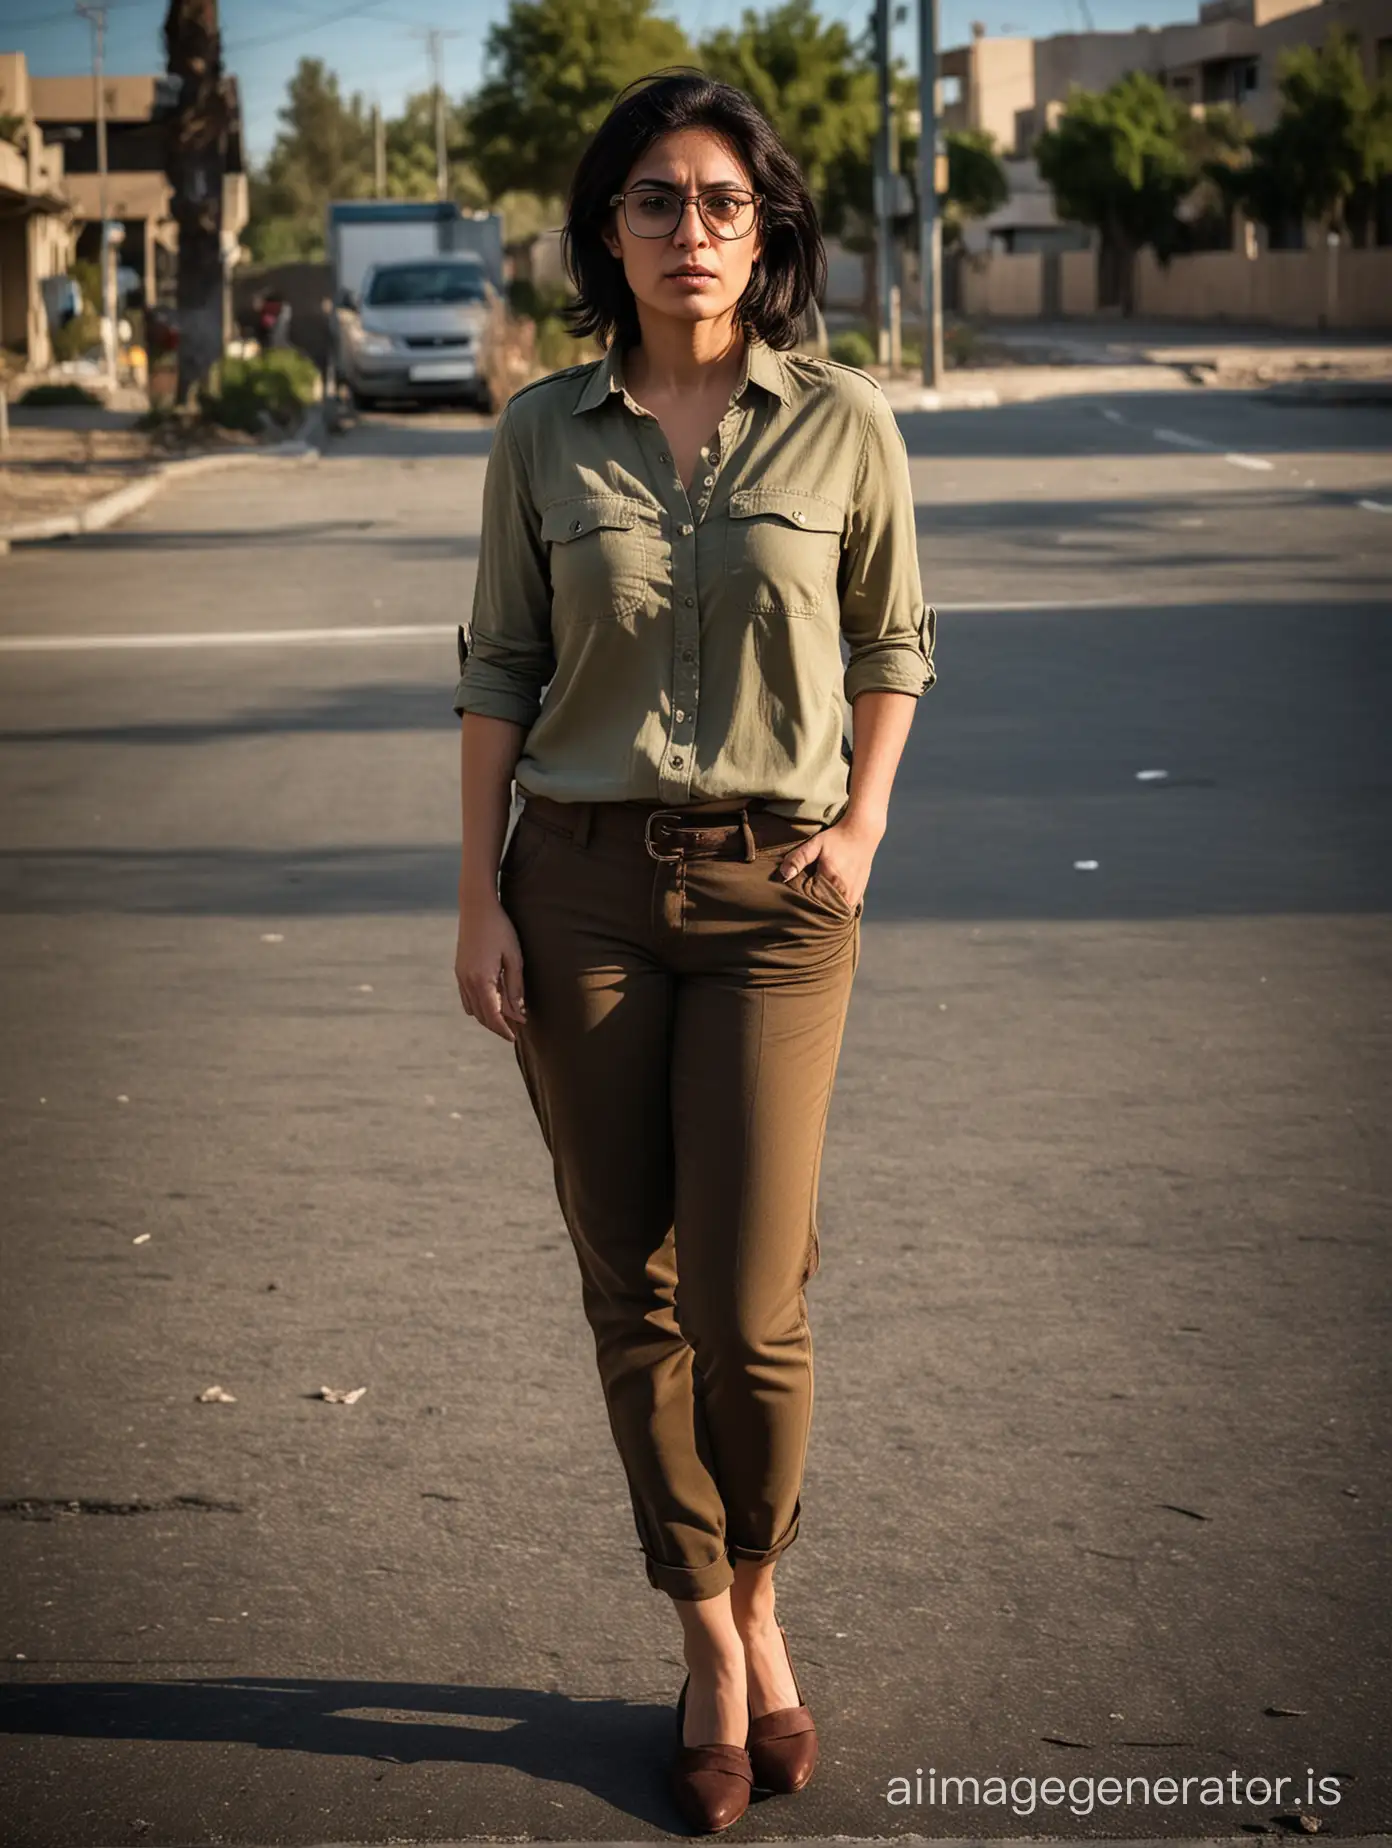 Iranian sad woman 40 years old, brown pants, brown shoes, olive shirt, glasses, black hair, full body shot, in a parking, dramatic lighting